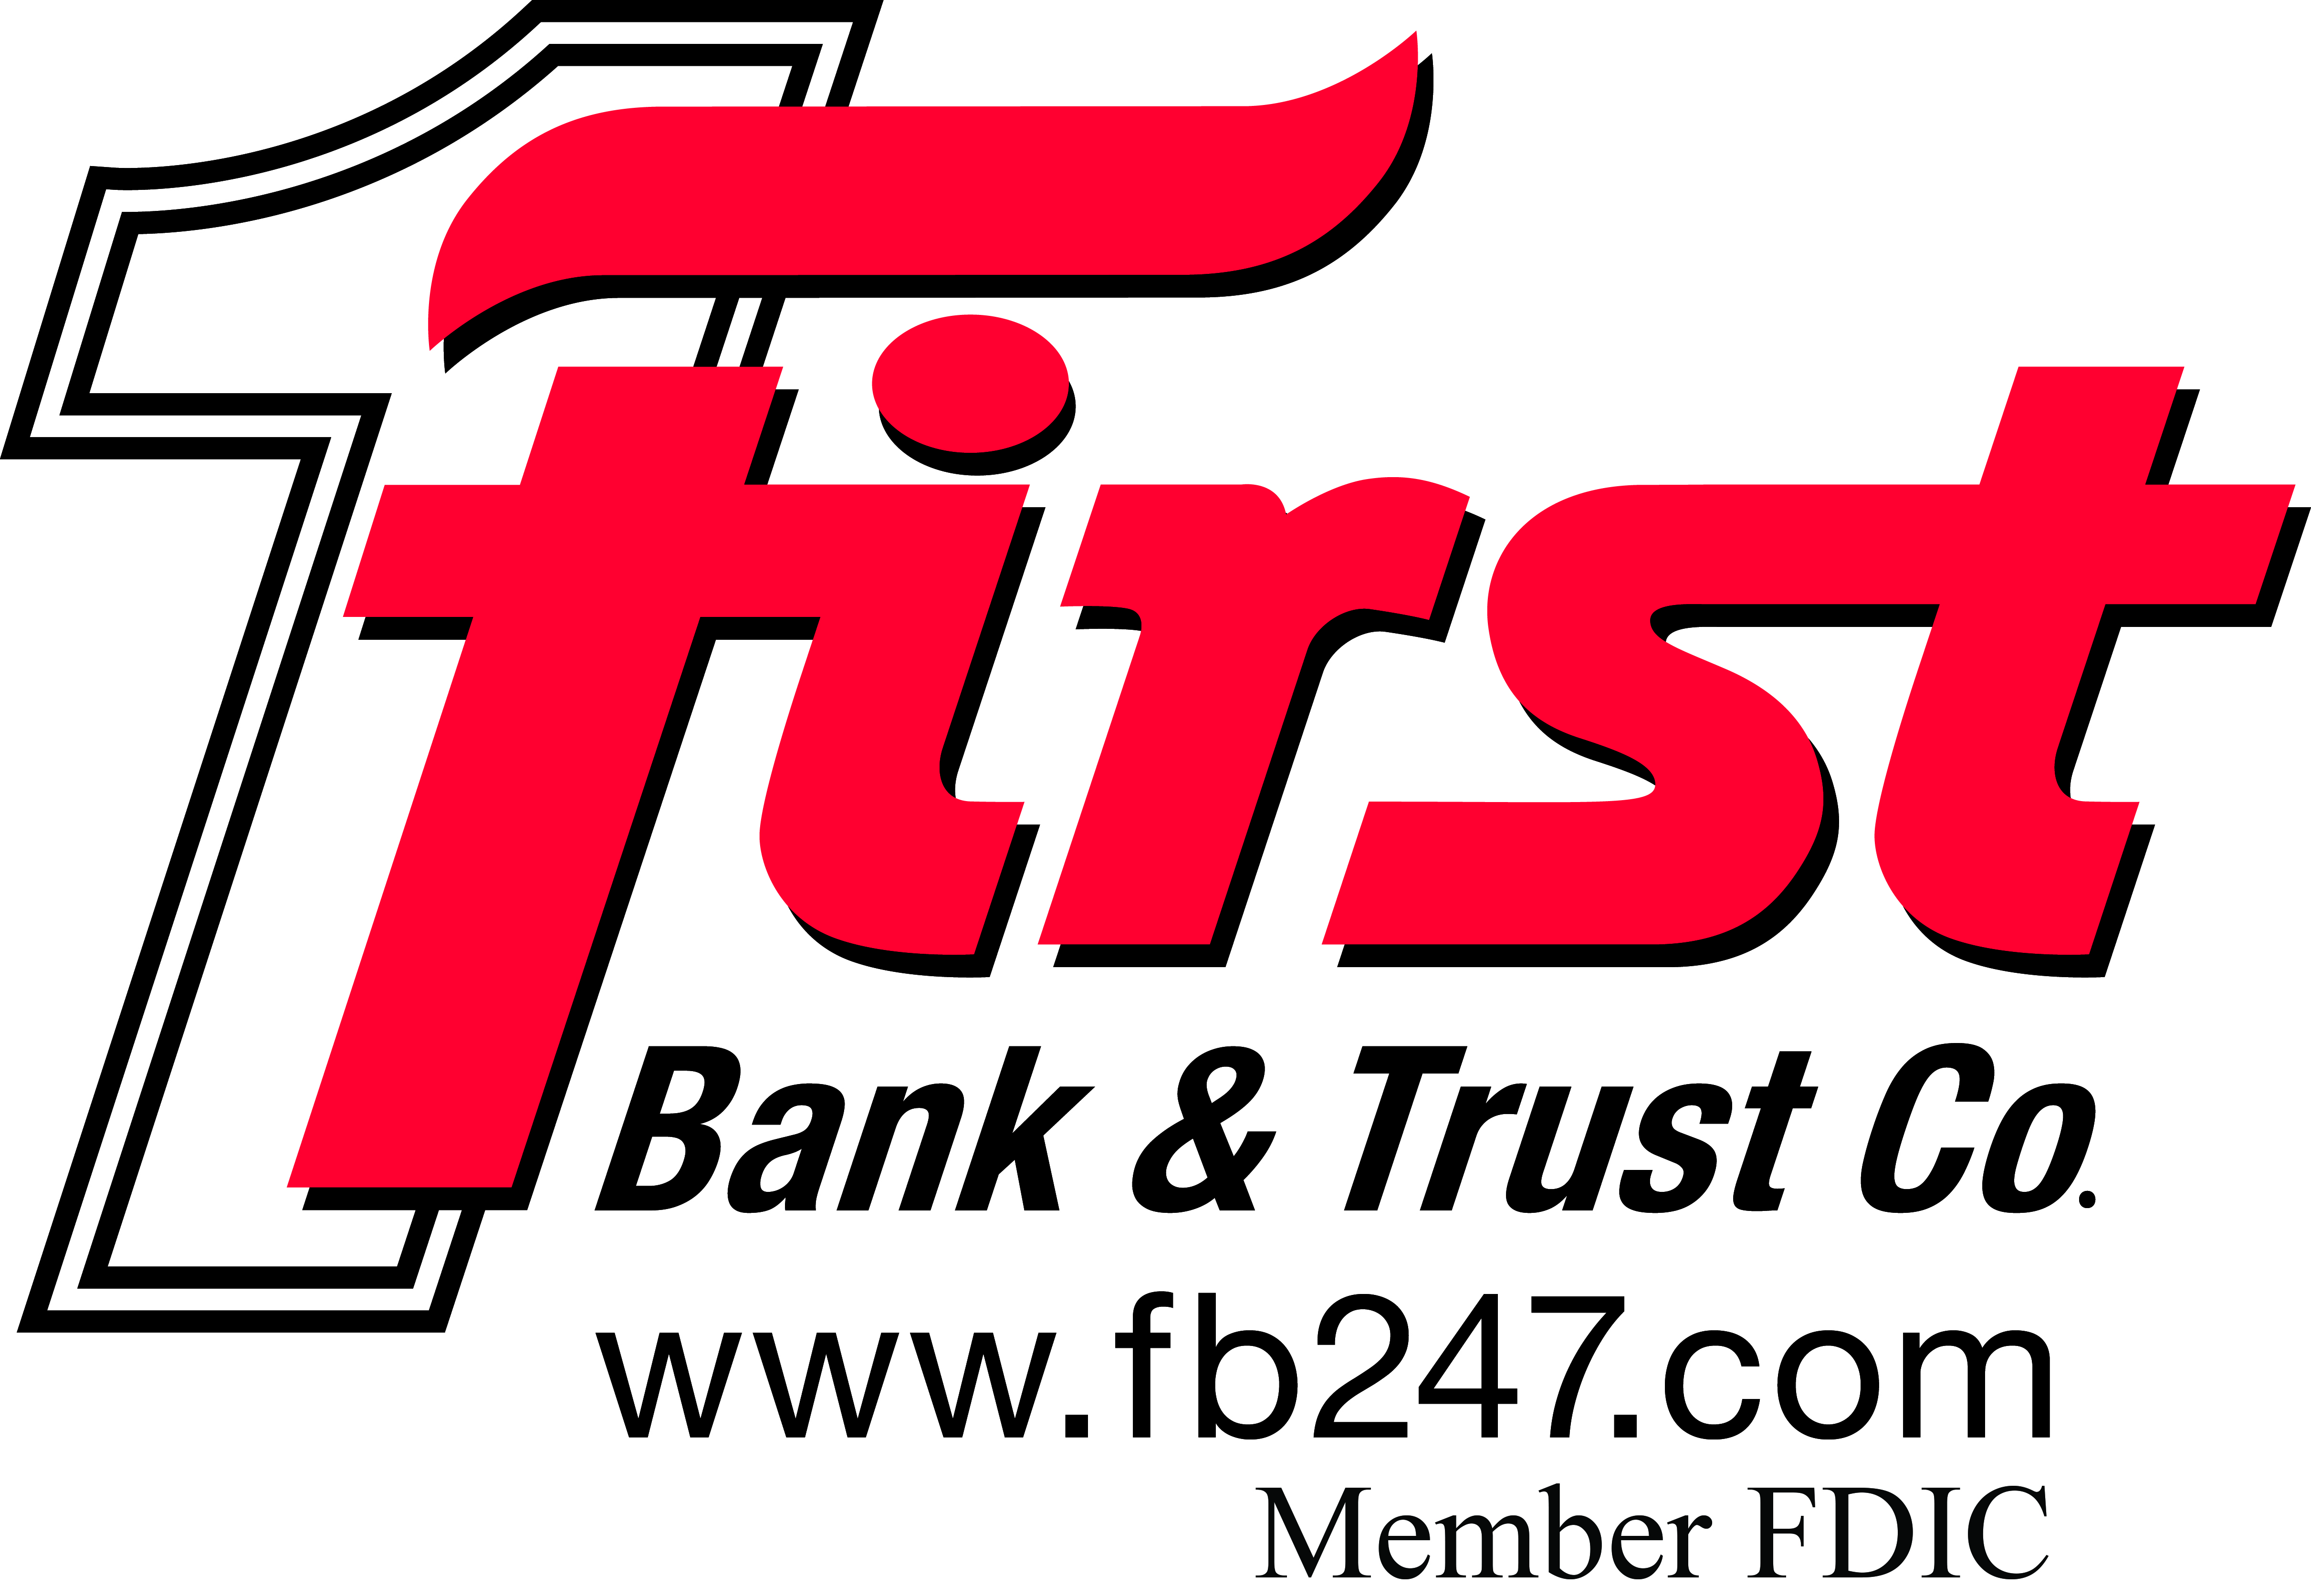 First Bank & Trust Co.